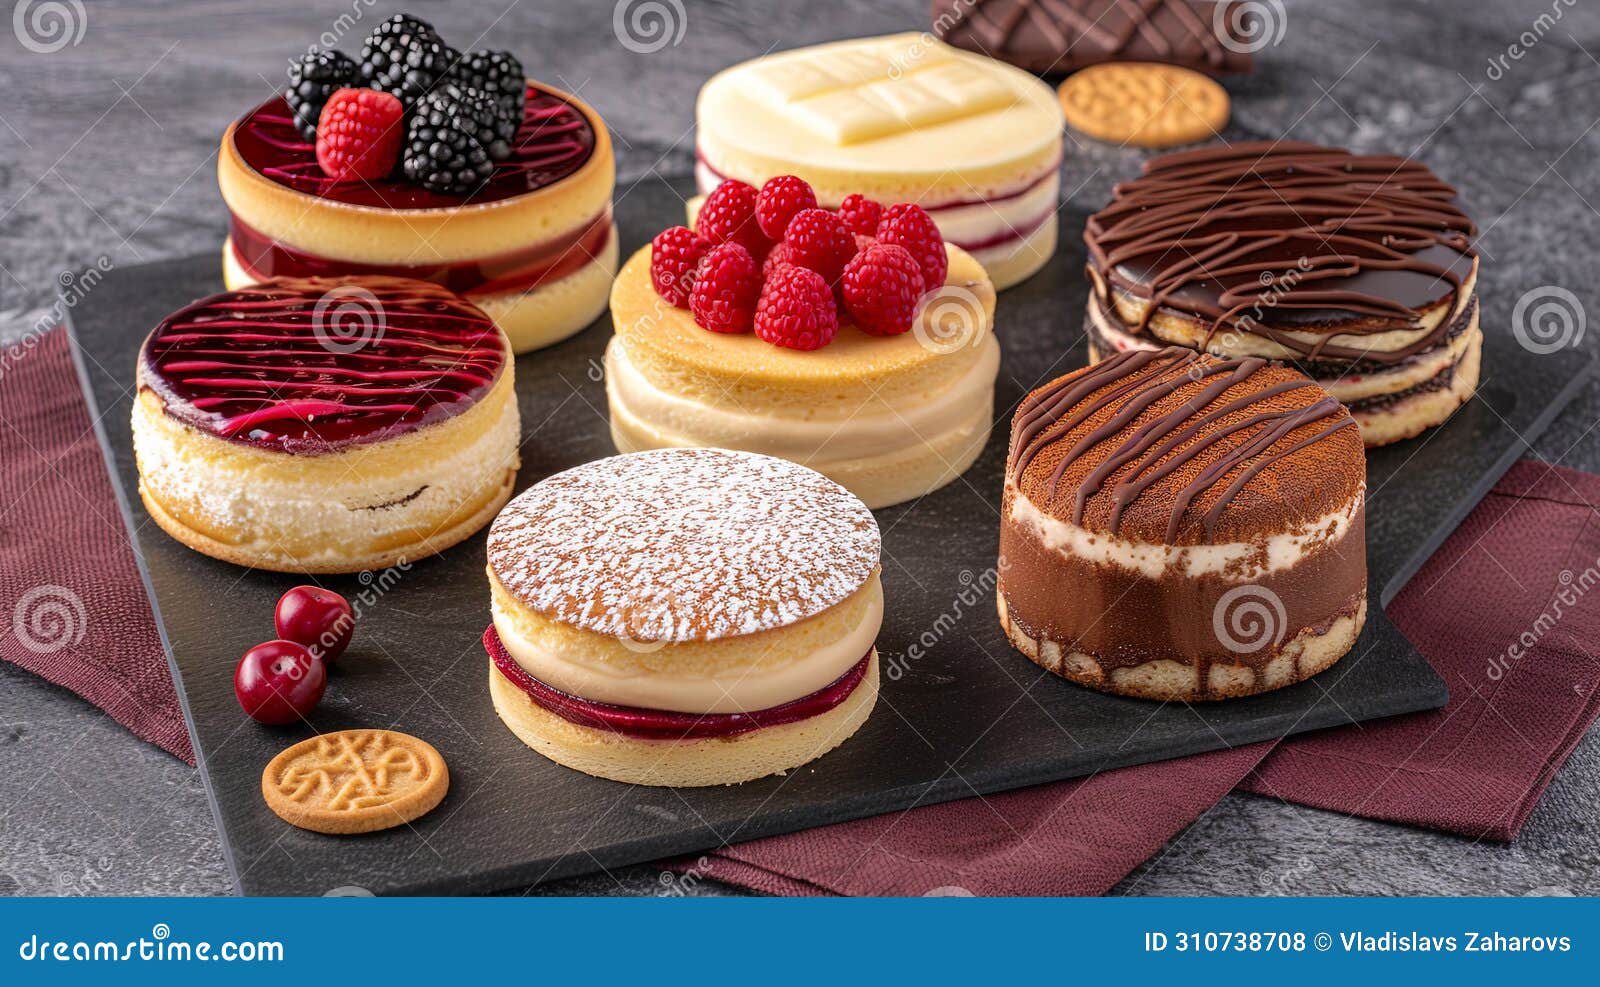 a table for desserts with numerous sweets: cakes, cakes, cookies and fruits prepared for a festiv